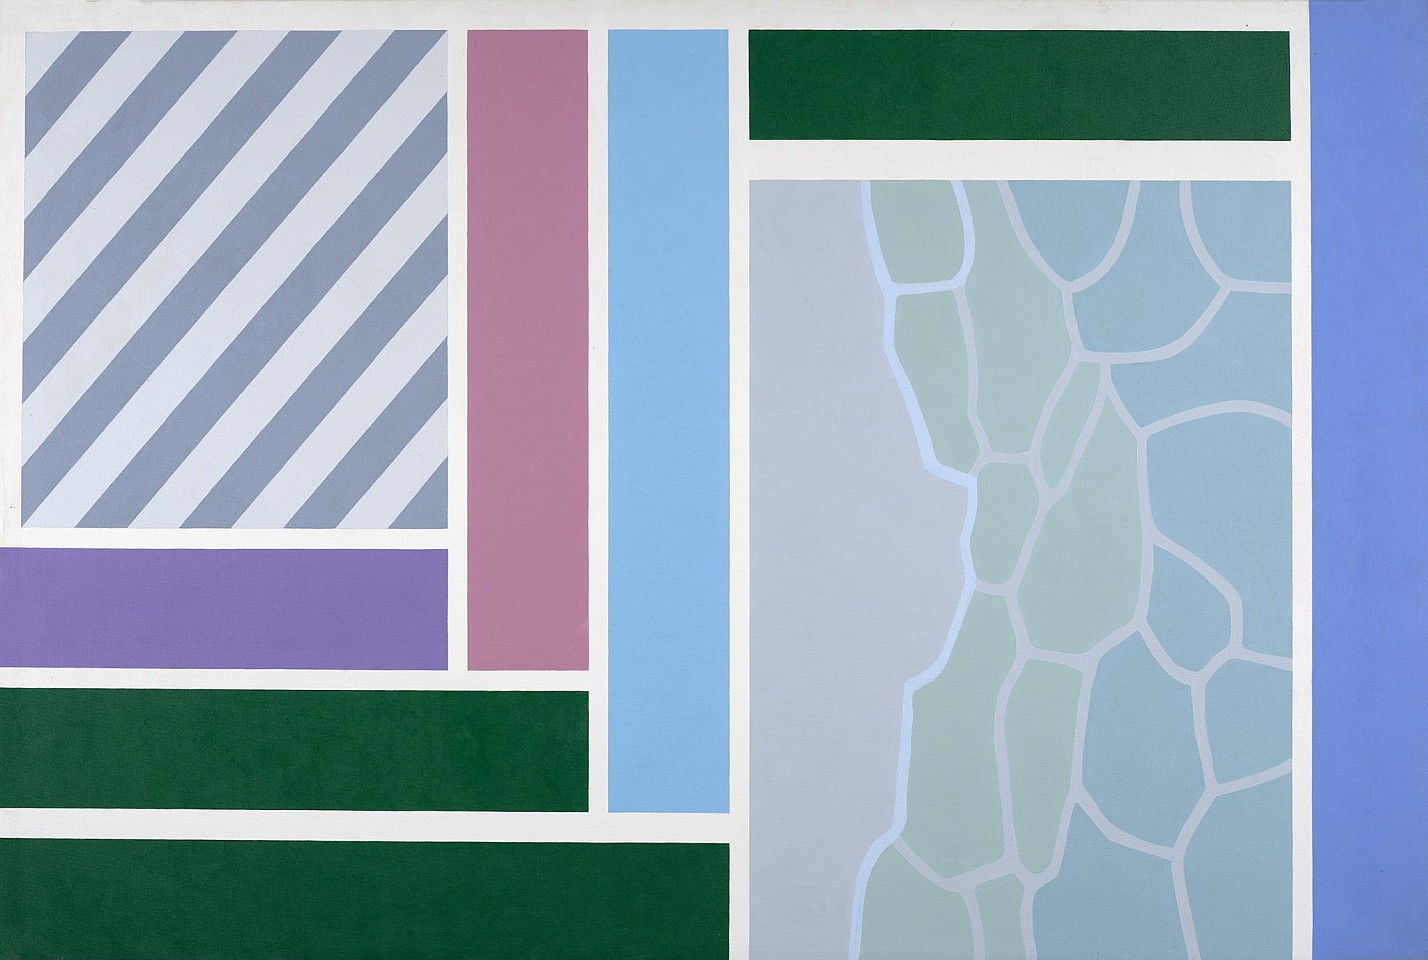 Mary Dill Henry, Chateau de Courances, 1985
Acrylic on canvas, 48 x 72 in. (121.9 x 182.9 cm)
MHEN-00021